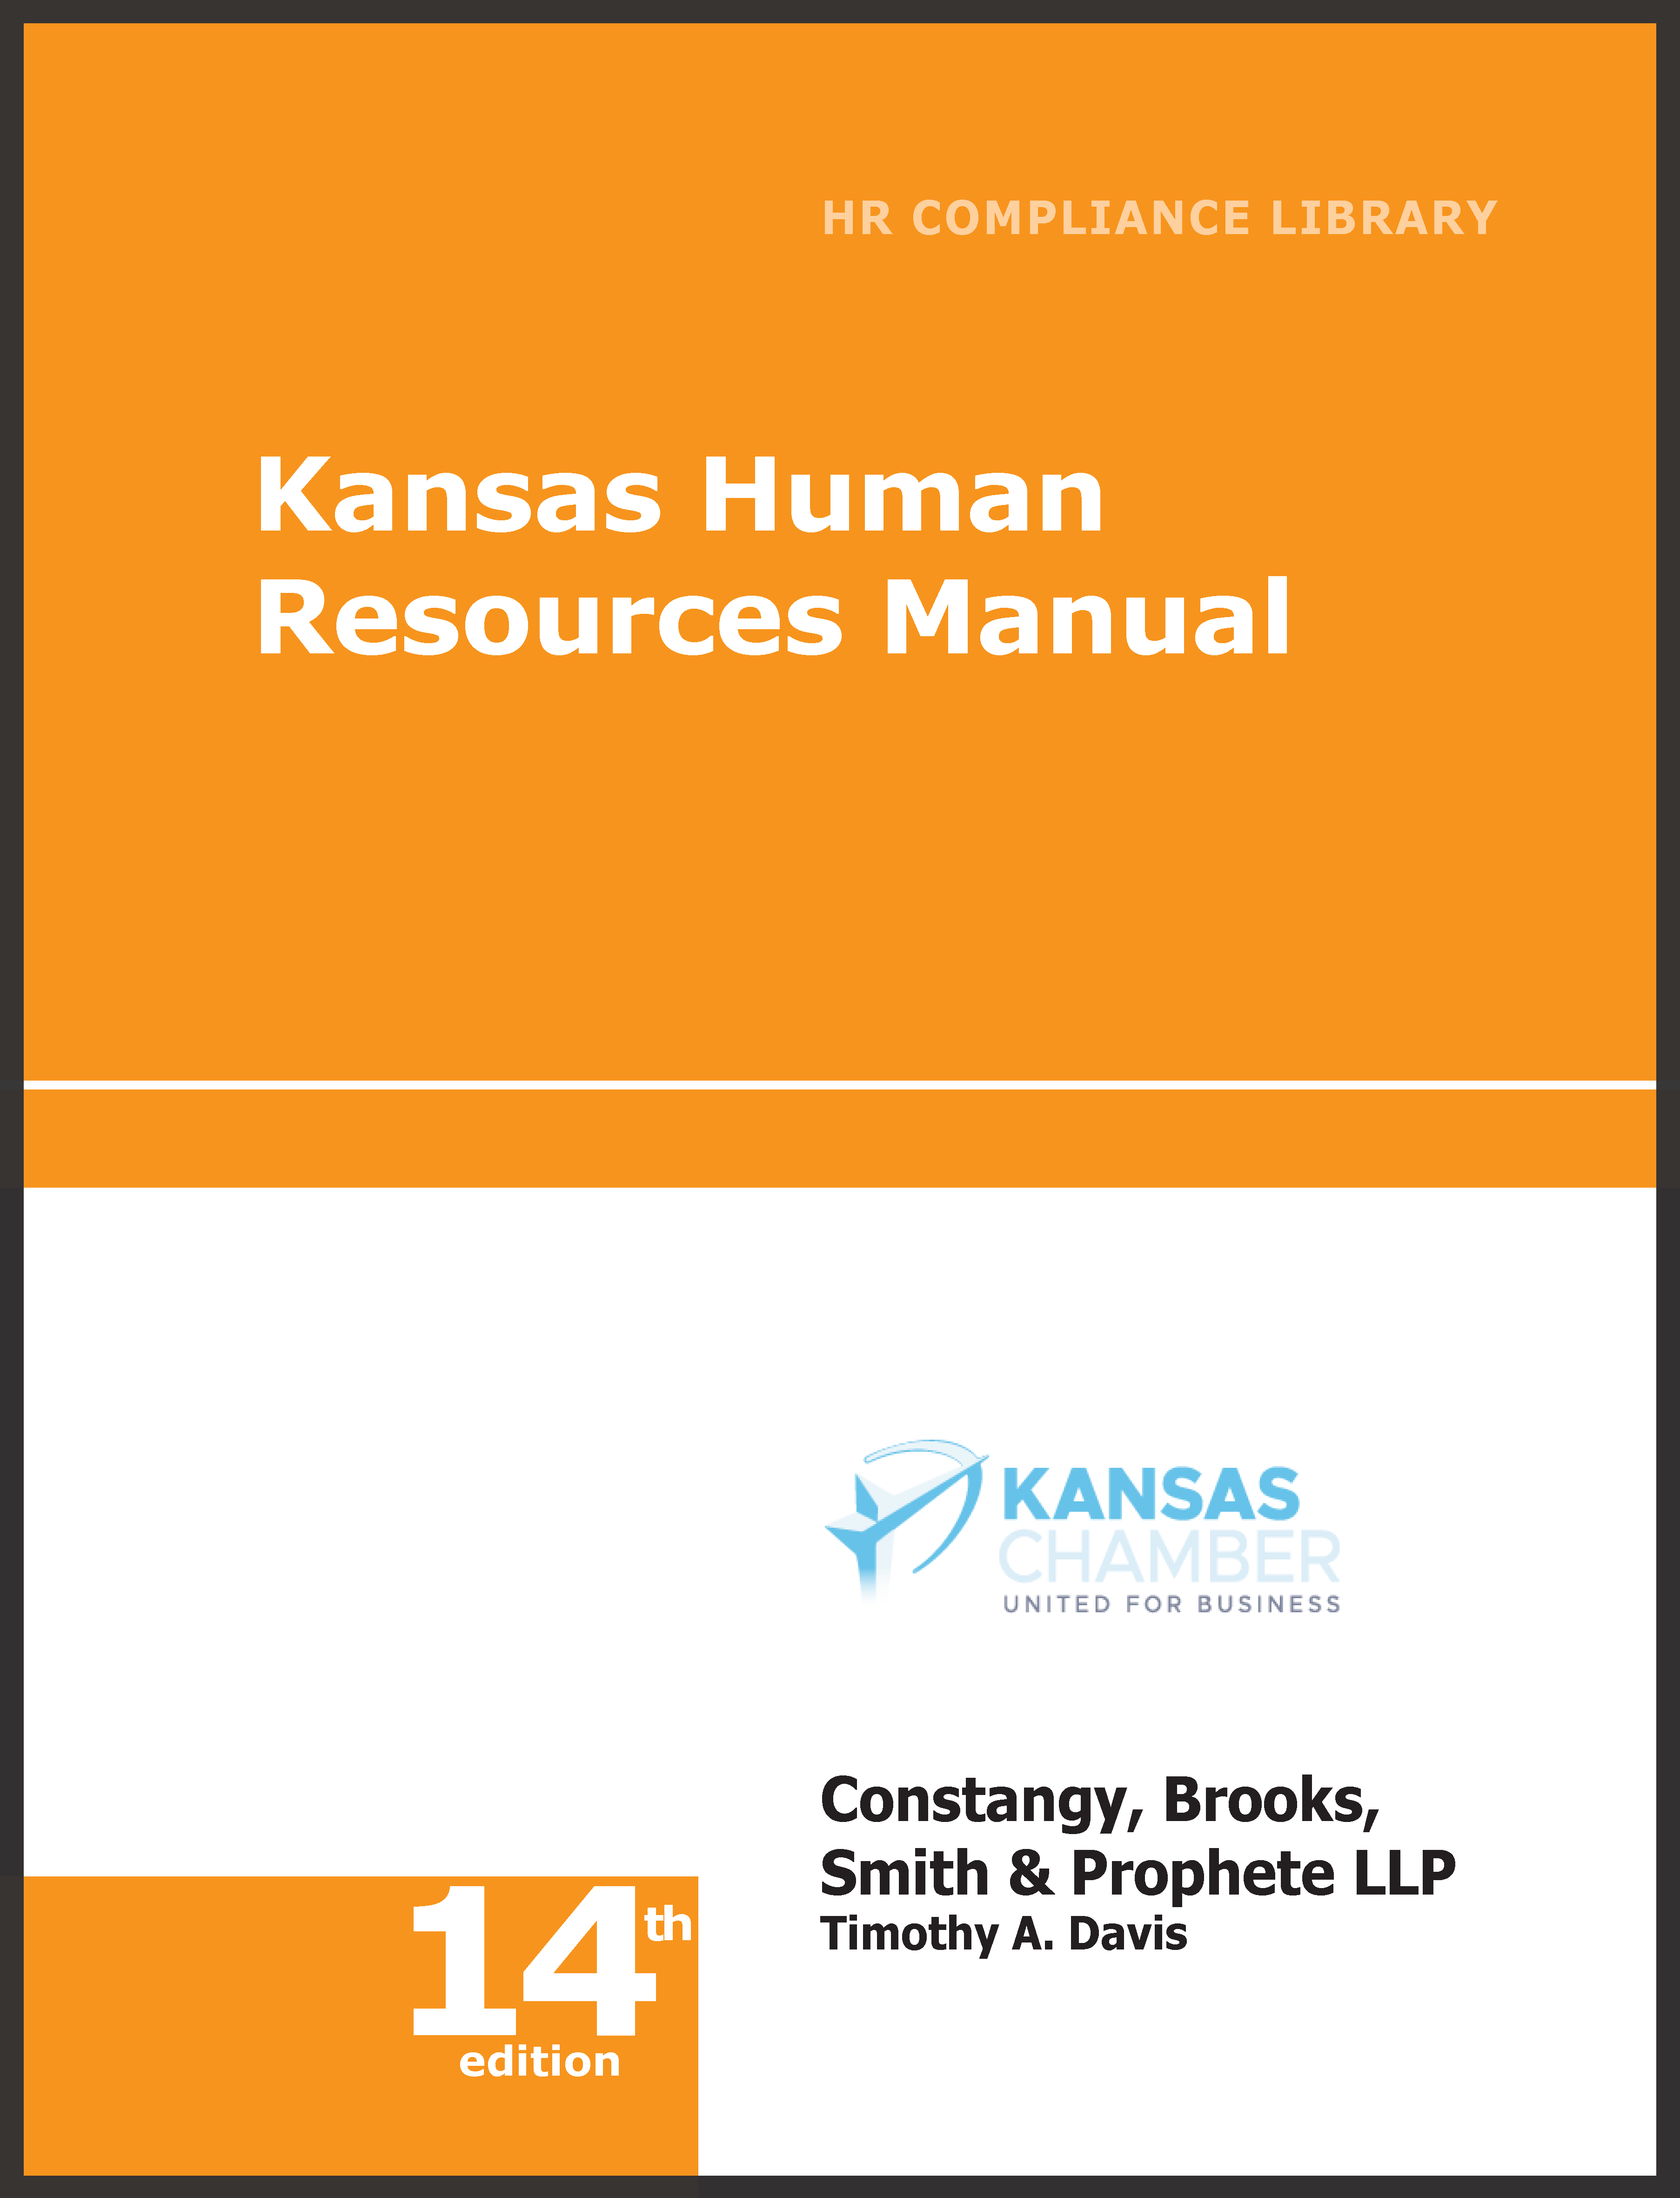 Kansas Human Resources Library employment law image, remote work, labor laws, employment laws, right to work, order of protection, minimum wage